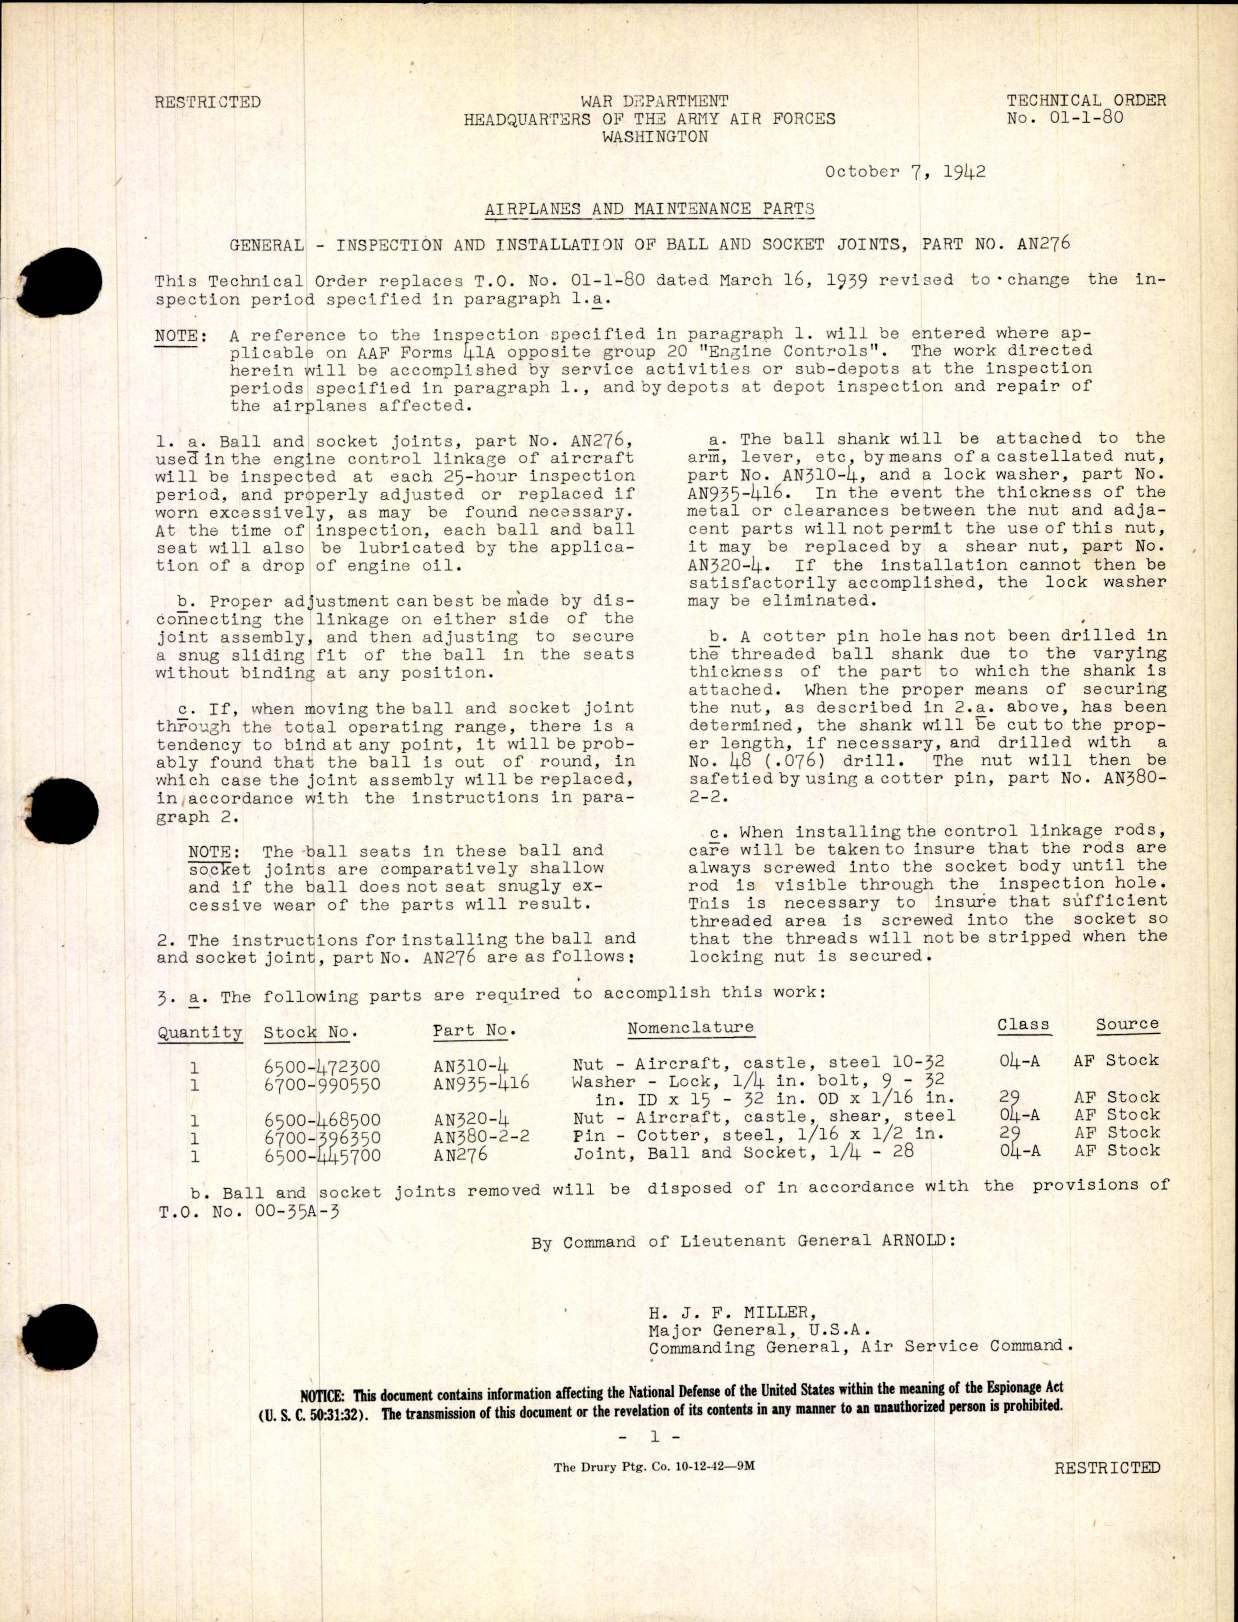 Sample page 1 from AirCorps Library document: Airplanes and Maintenance Parts for Inspection and Installation of Ball and Socket Joints, Part No. AN276